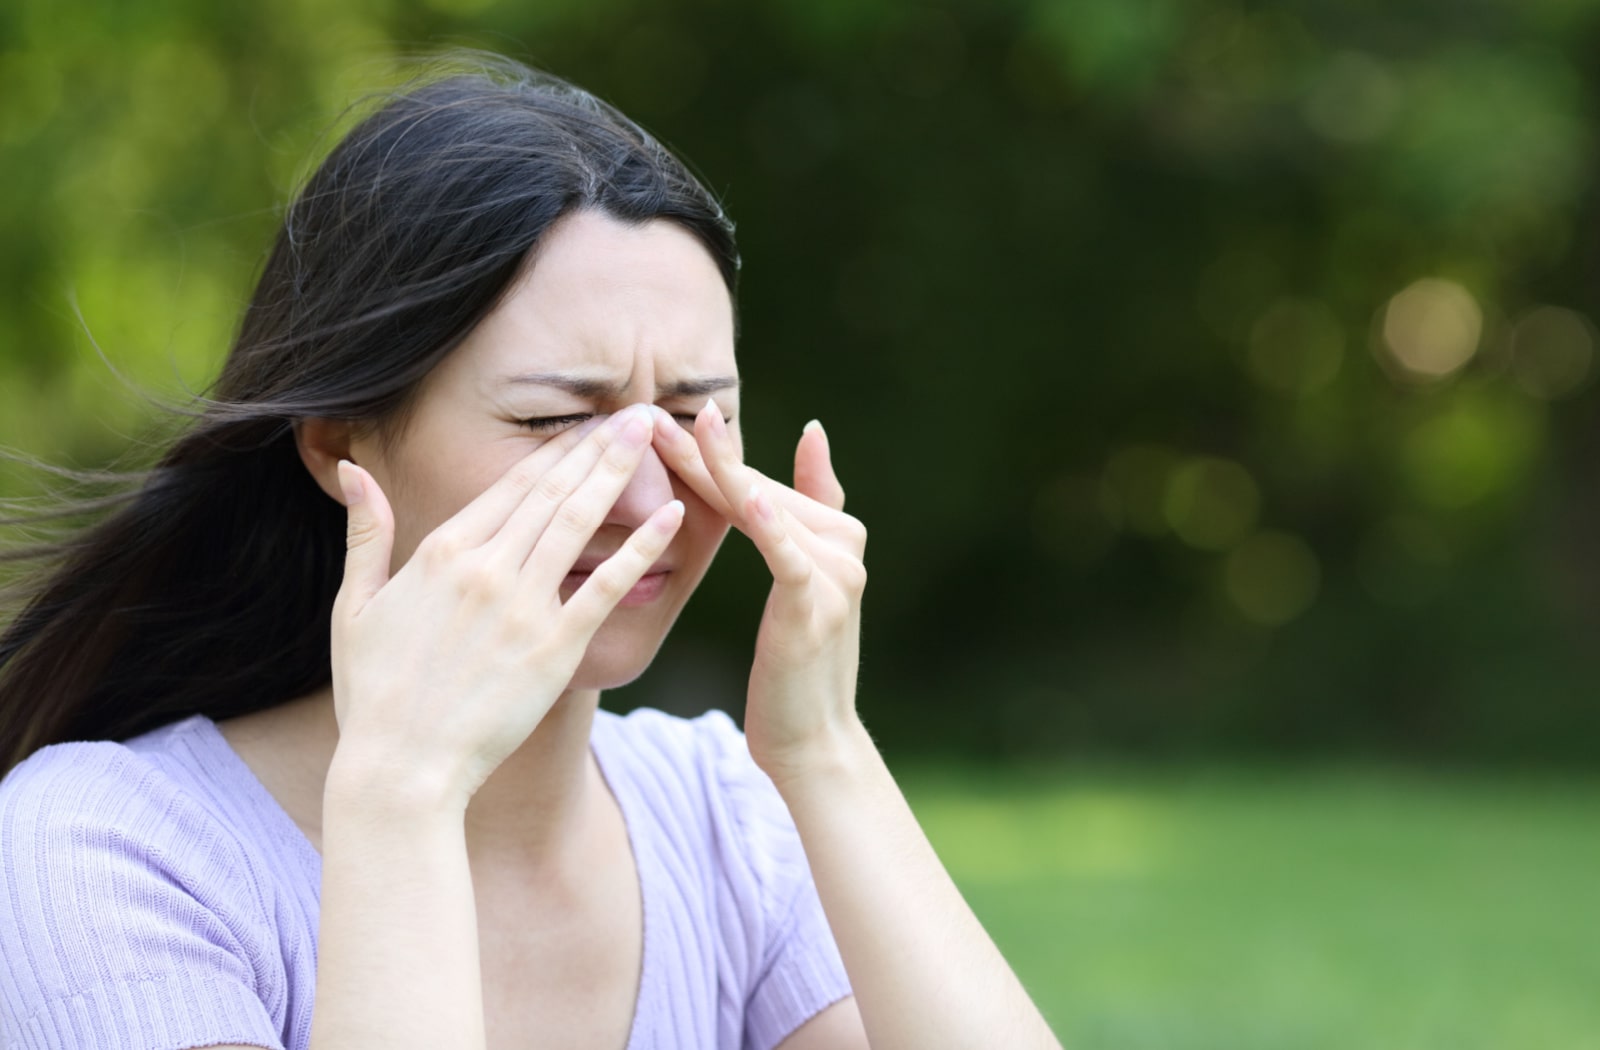 A woman rubbing her eyes due to dryness